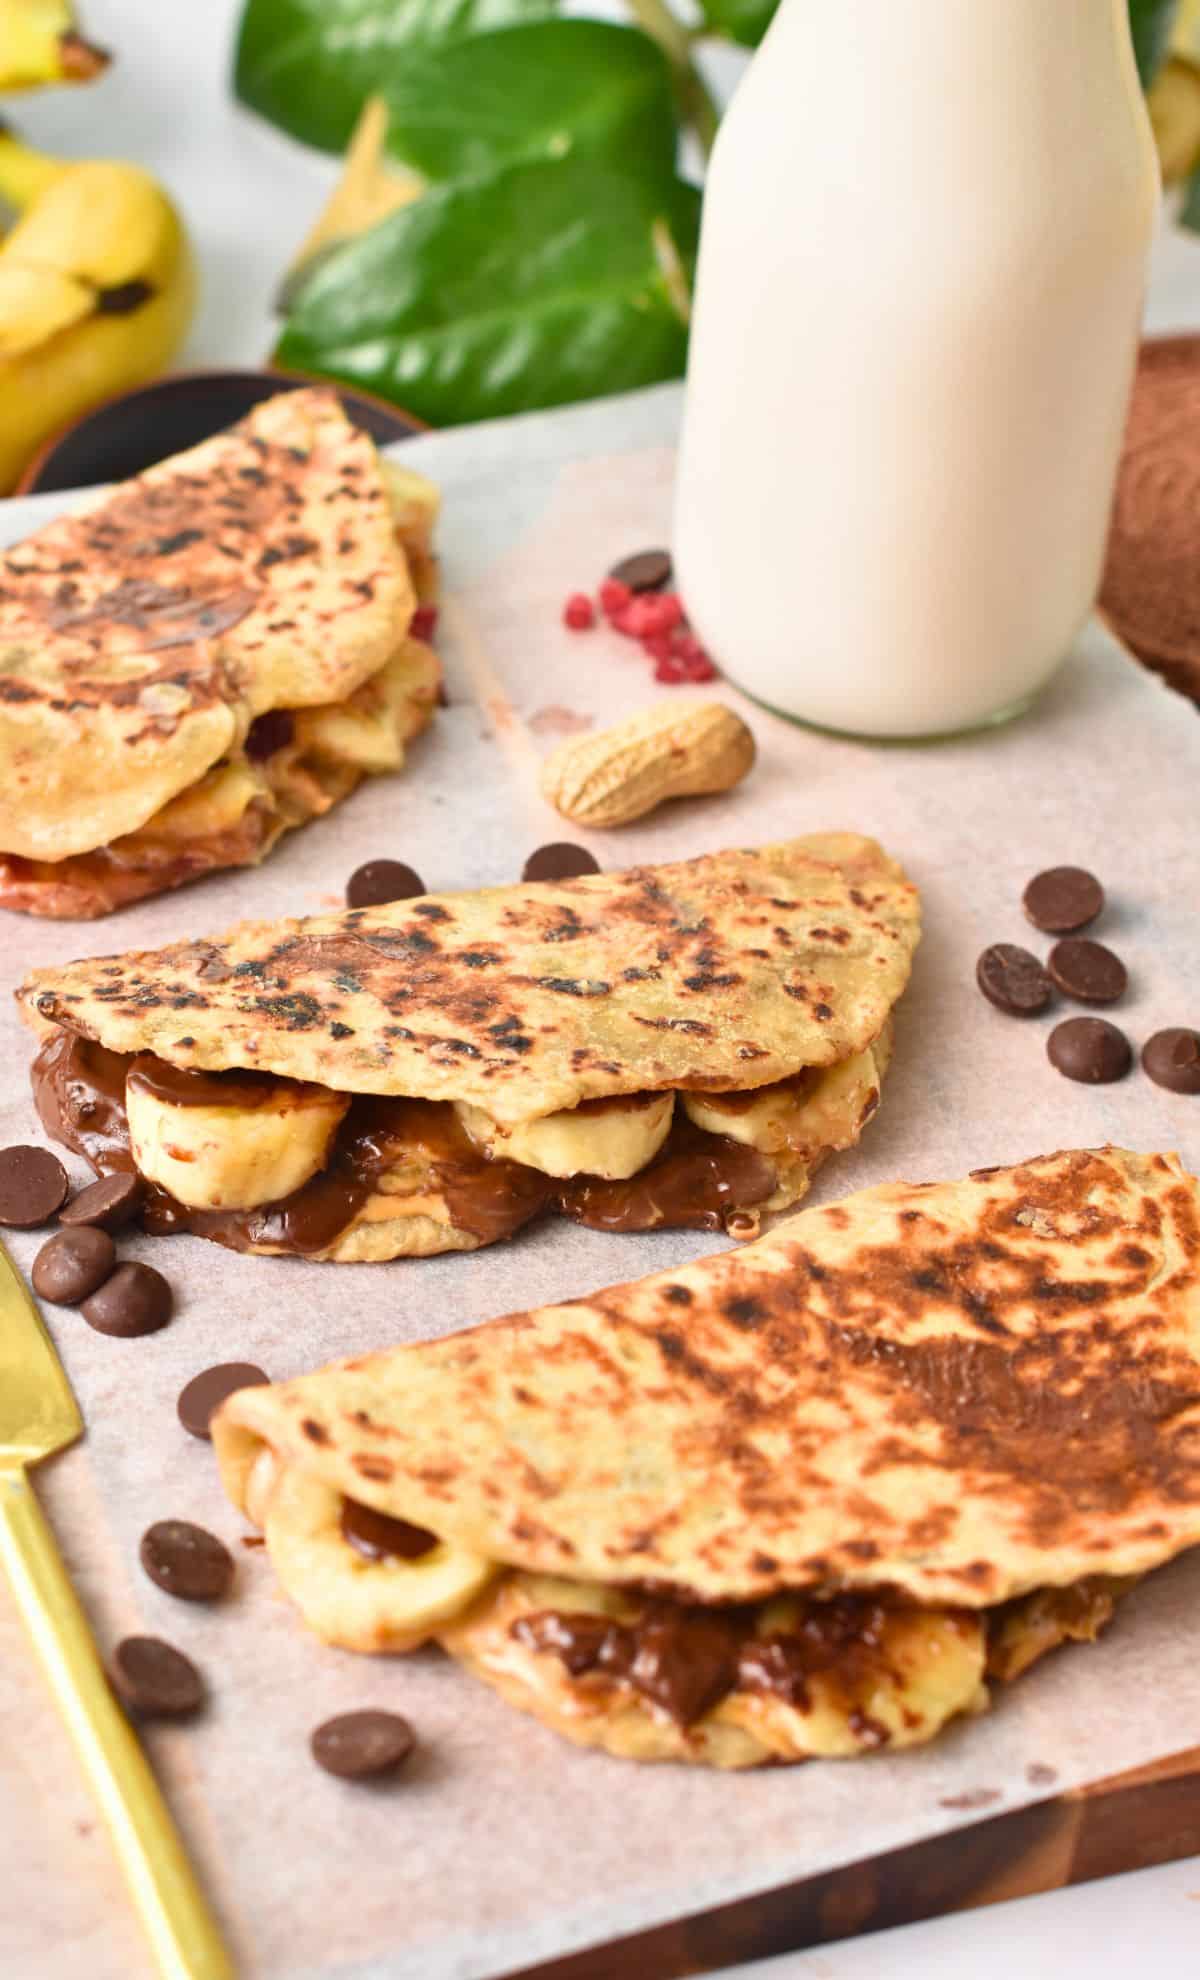 Banana Tortillas filled with banana and chocolate chips and toasted.